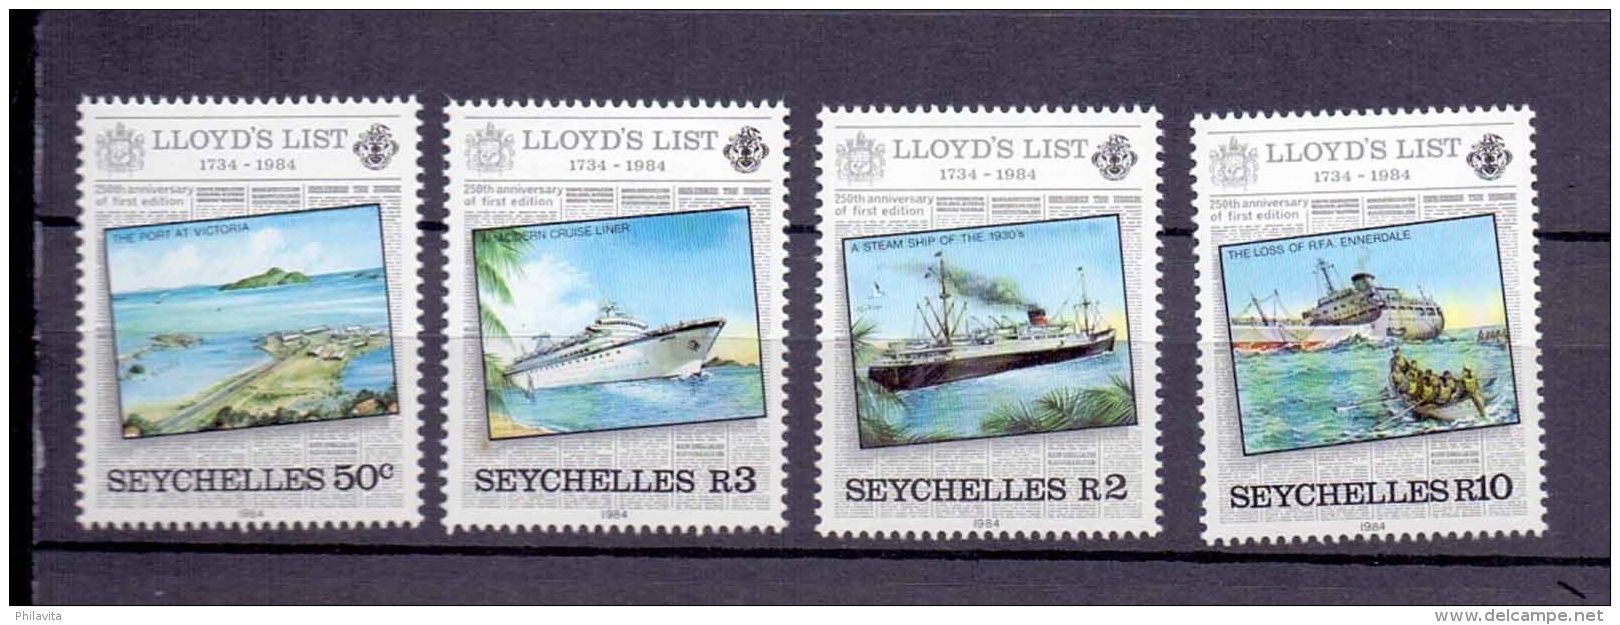 1984 Seyshells - 250 Years Of Lloyd's List - Parallel Issue Of 17 Countries - 4 V Paper - MNH** Mi 554/557 (bsh) - Seychelles (1976-...)